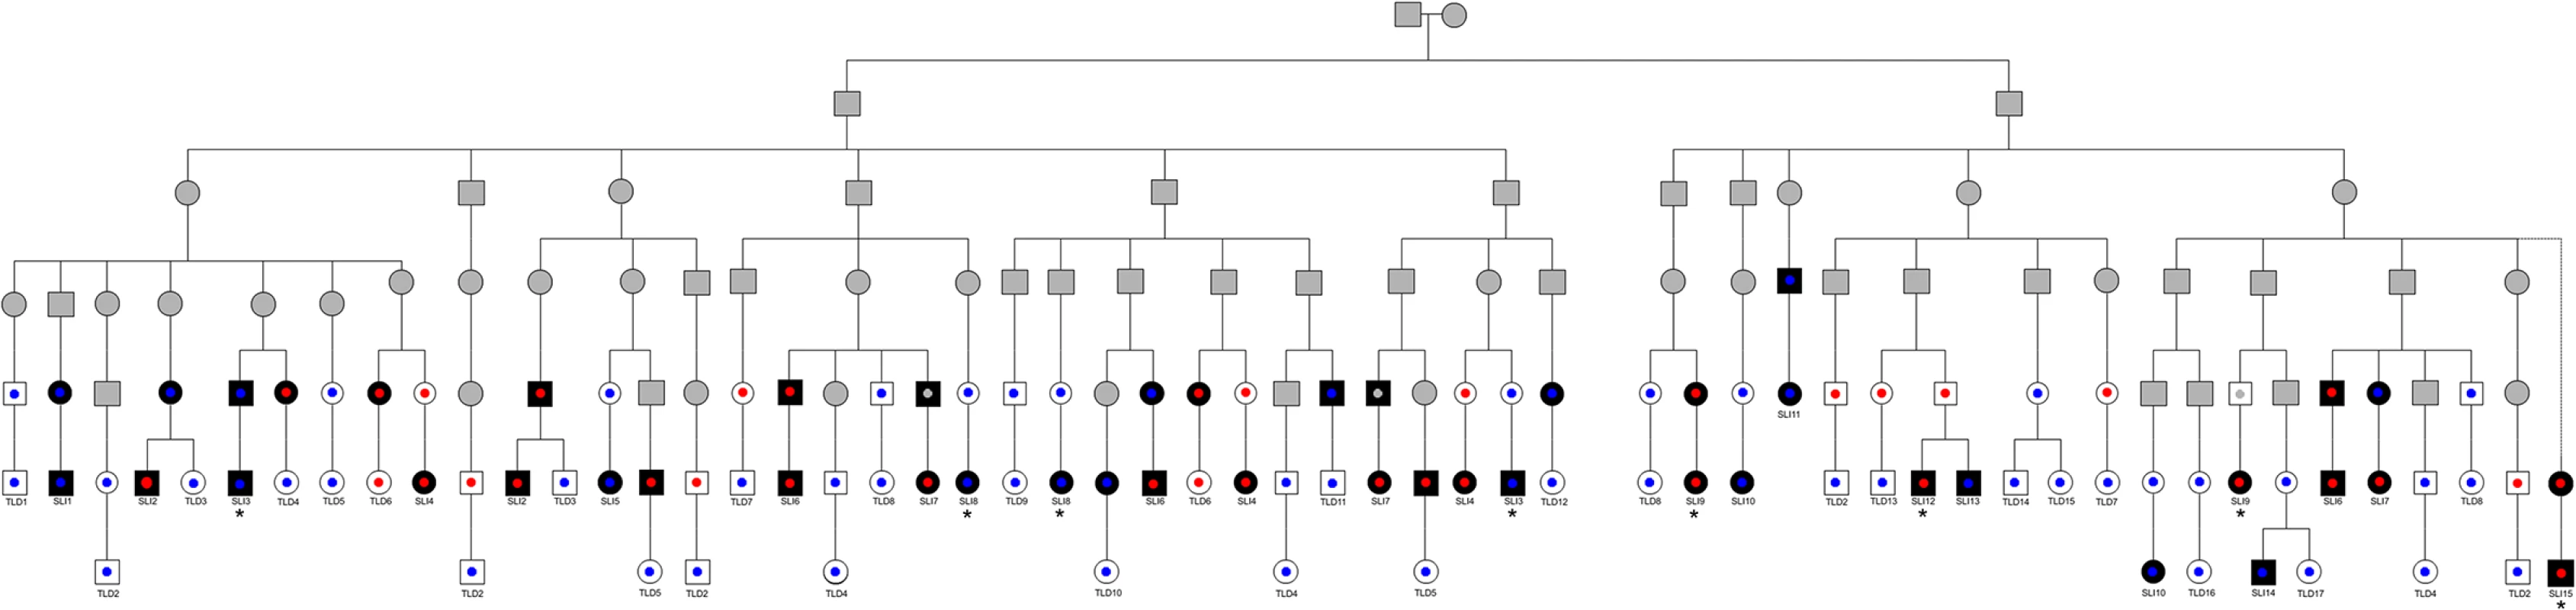 Pedigree showing direct lines of descent between founder brothers and children in Robinson Crusoe validation cohort.